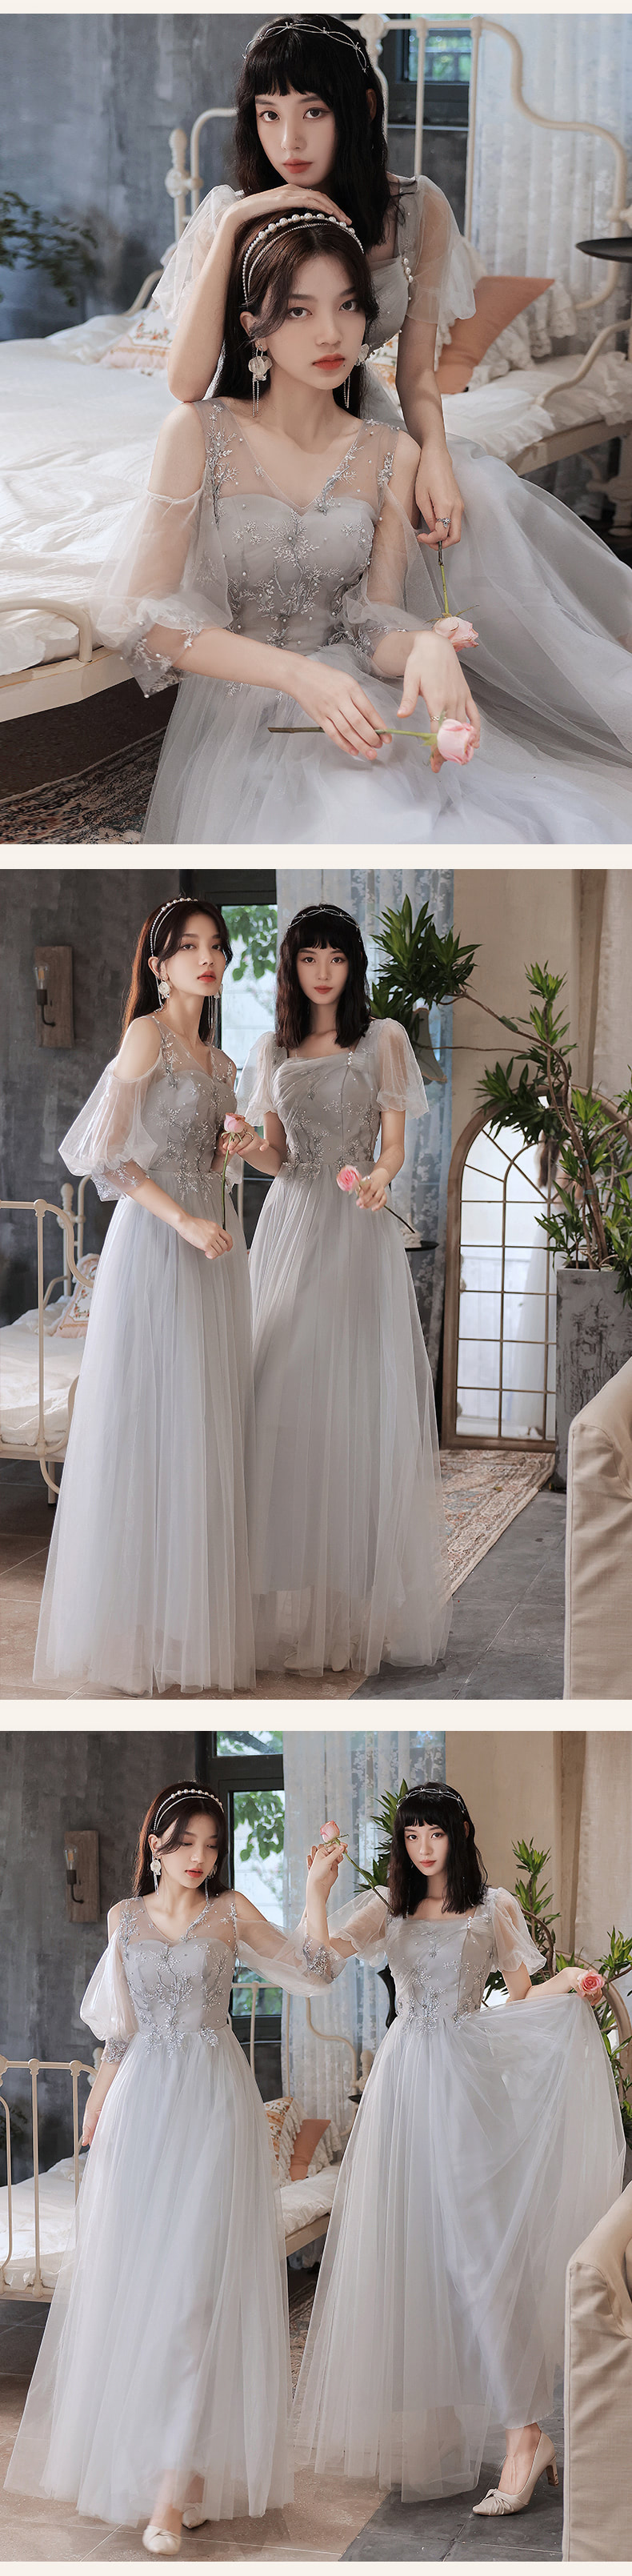 Simple-A-line-Bridal-Party-Gown-Gray-Bridesmaid-Maxi-Dress16.jpg